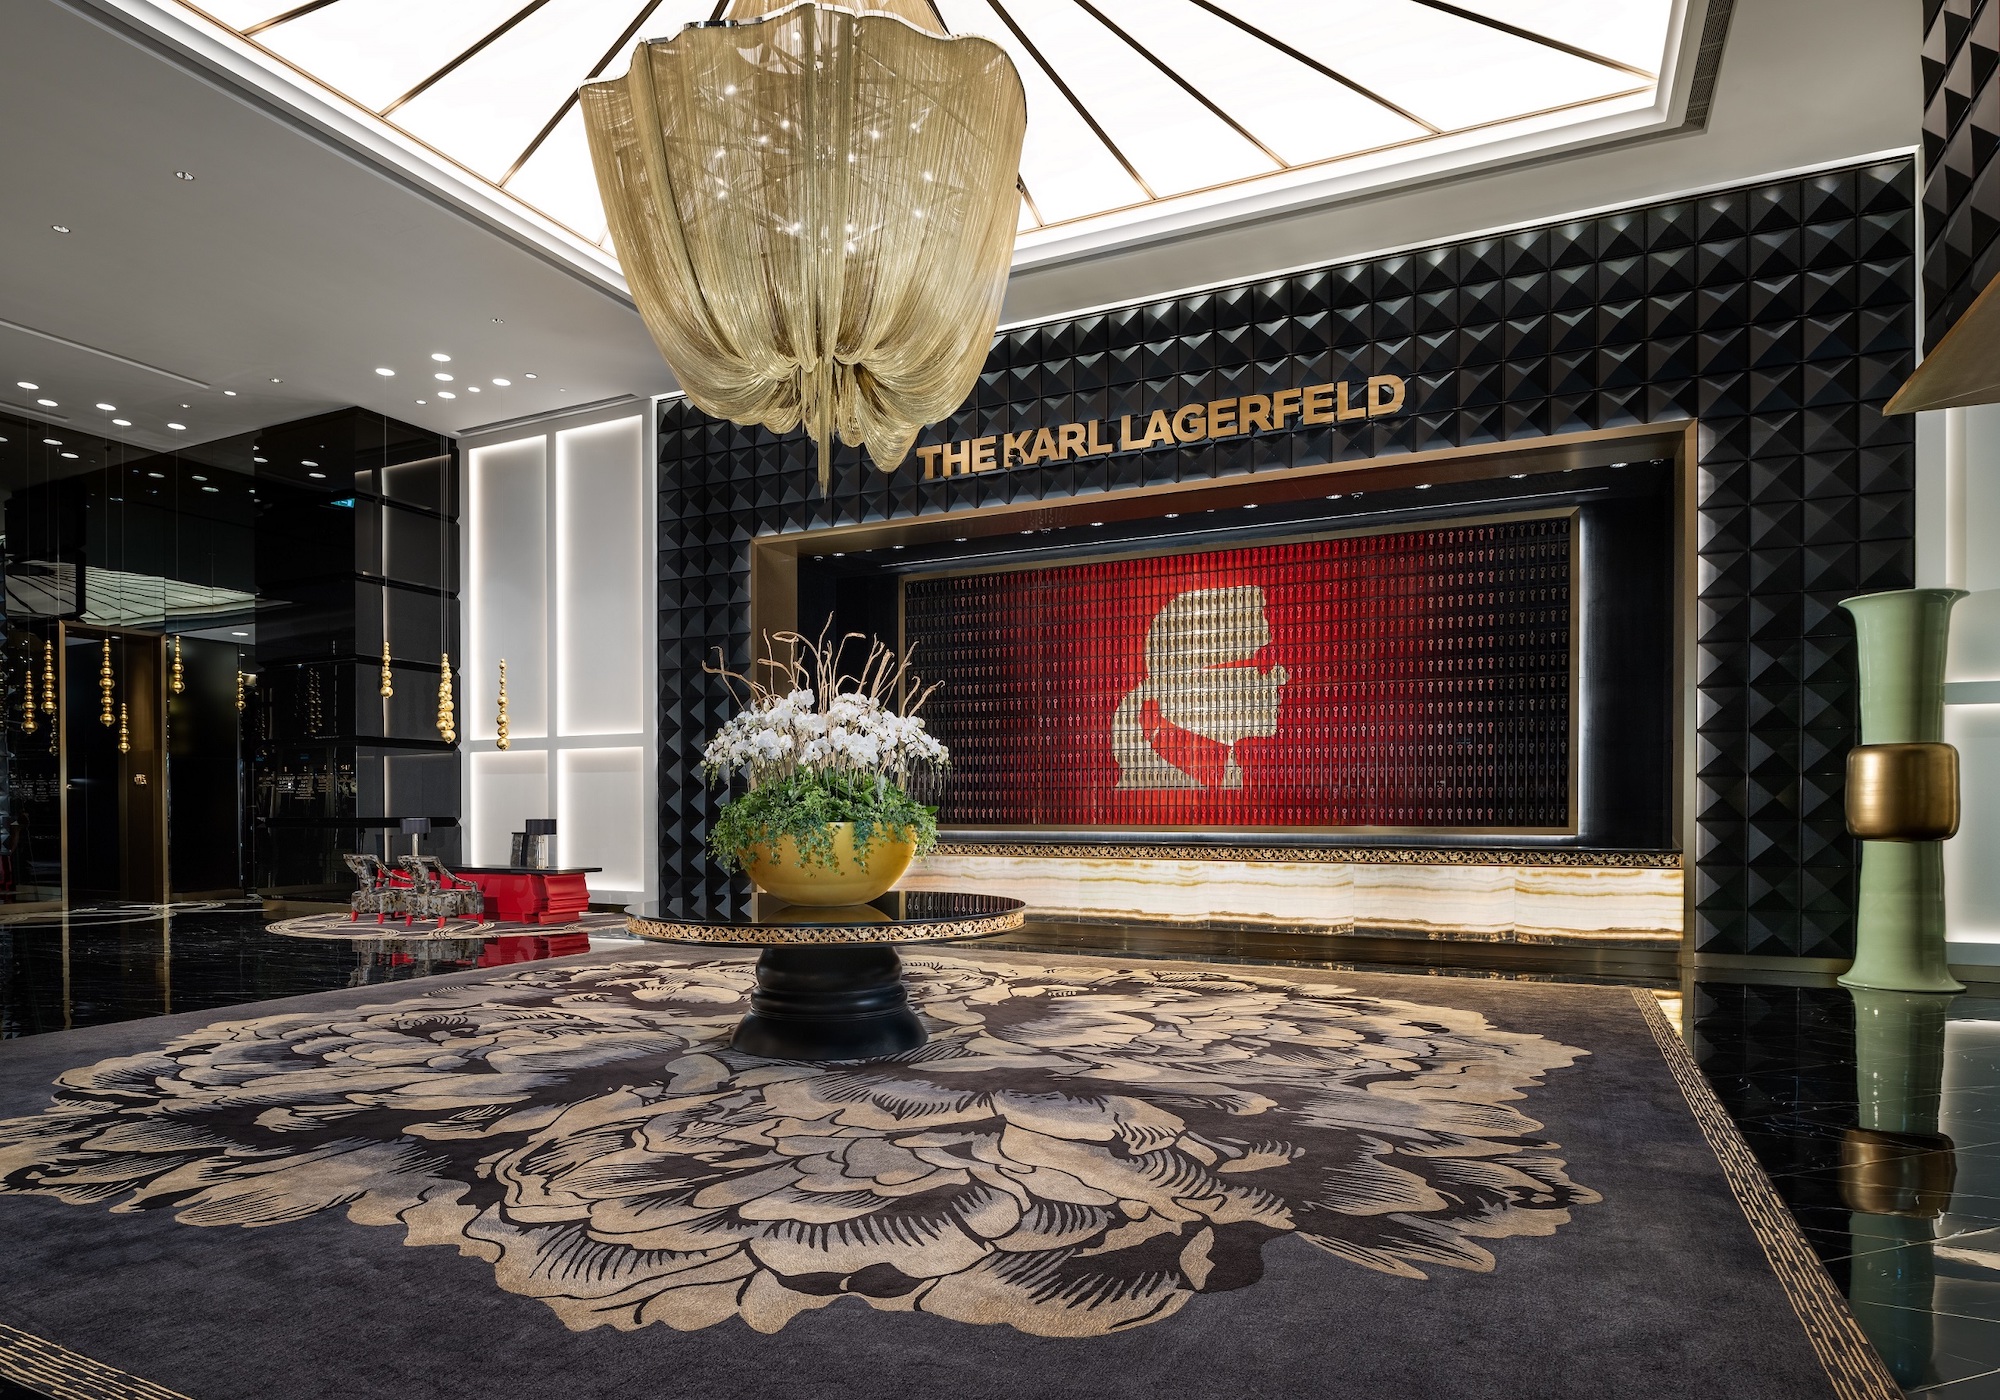 The Karl Lagerfeld, Macao’s first fashion hotel opens today